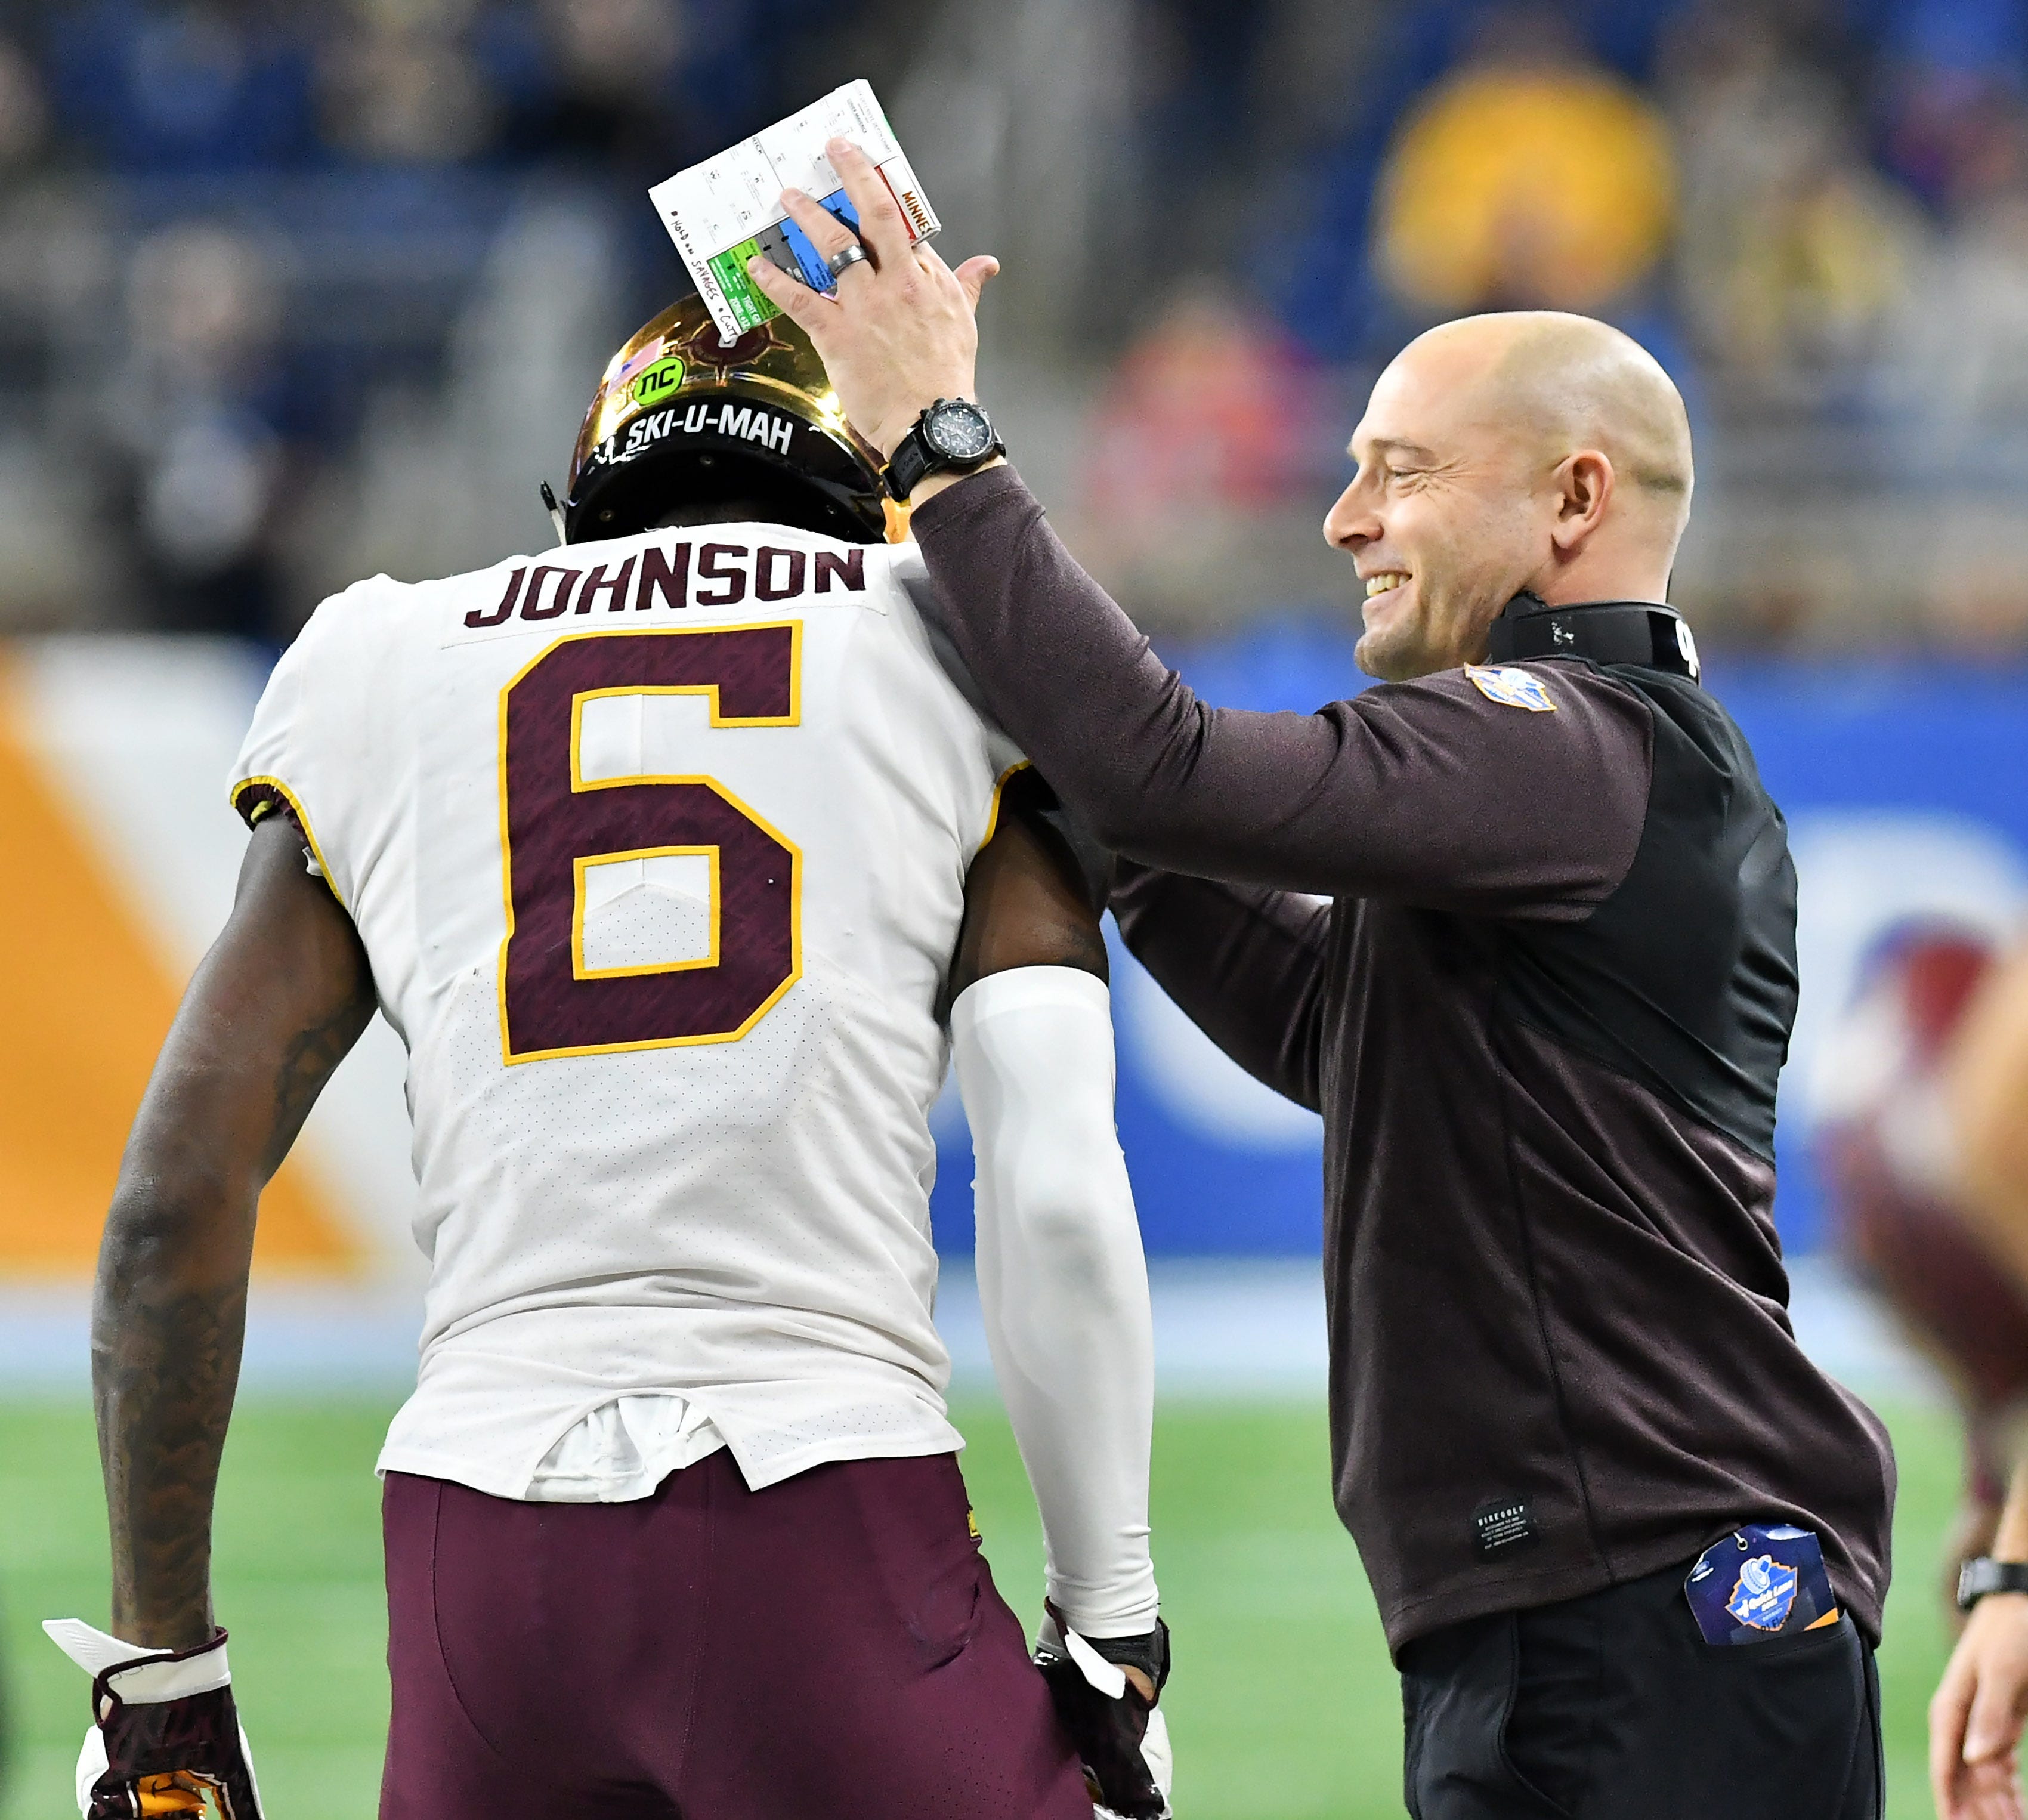 7. P.J. Fleck, Minnesota: The high-energy style of Fleck might rub some the wrong way, but he’s proven to be a winner. After leading Western Michigan to 13 wins and a spot in the Cotton Bowl in 2016, he had the Golden Gophers in a bowl game in Year 2 and in 2019 had Minnesota on the verge of a division title while winning 11 games and picking up a victory in the Outback Bowl.